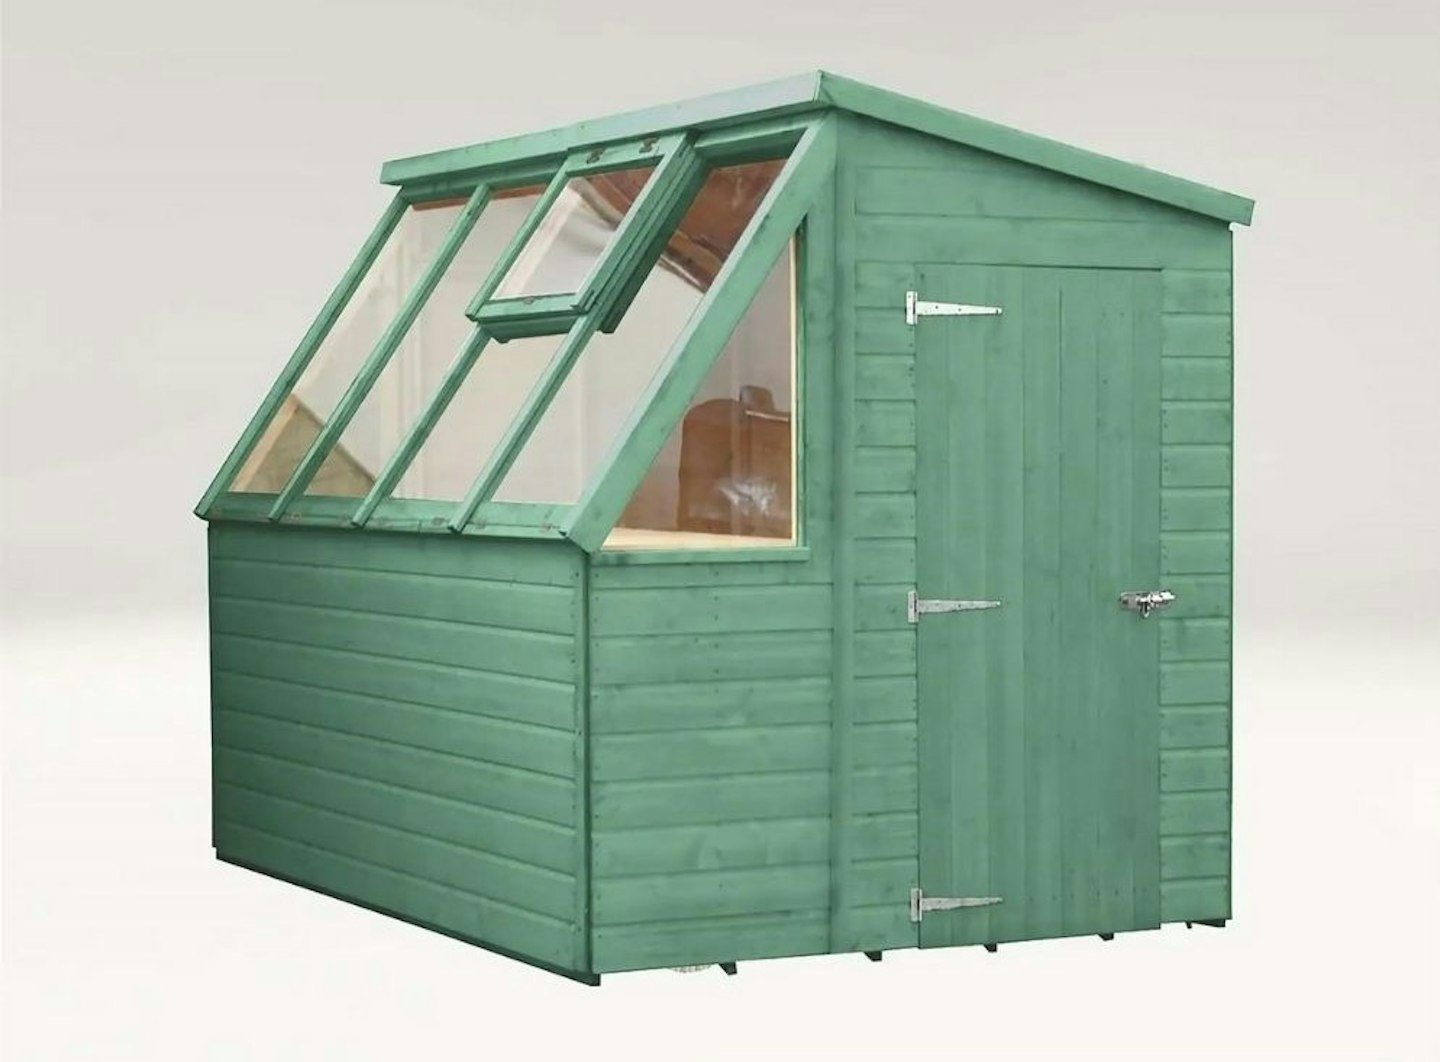 Country Living Caythorpe 8 x 6 Premium Potting Shed Painted